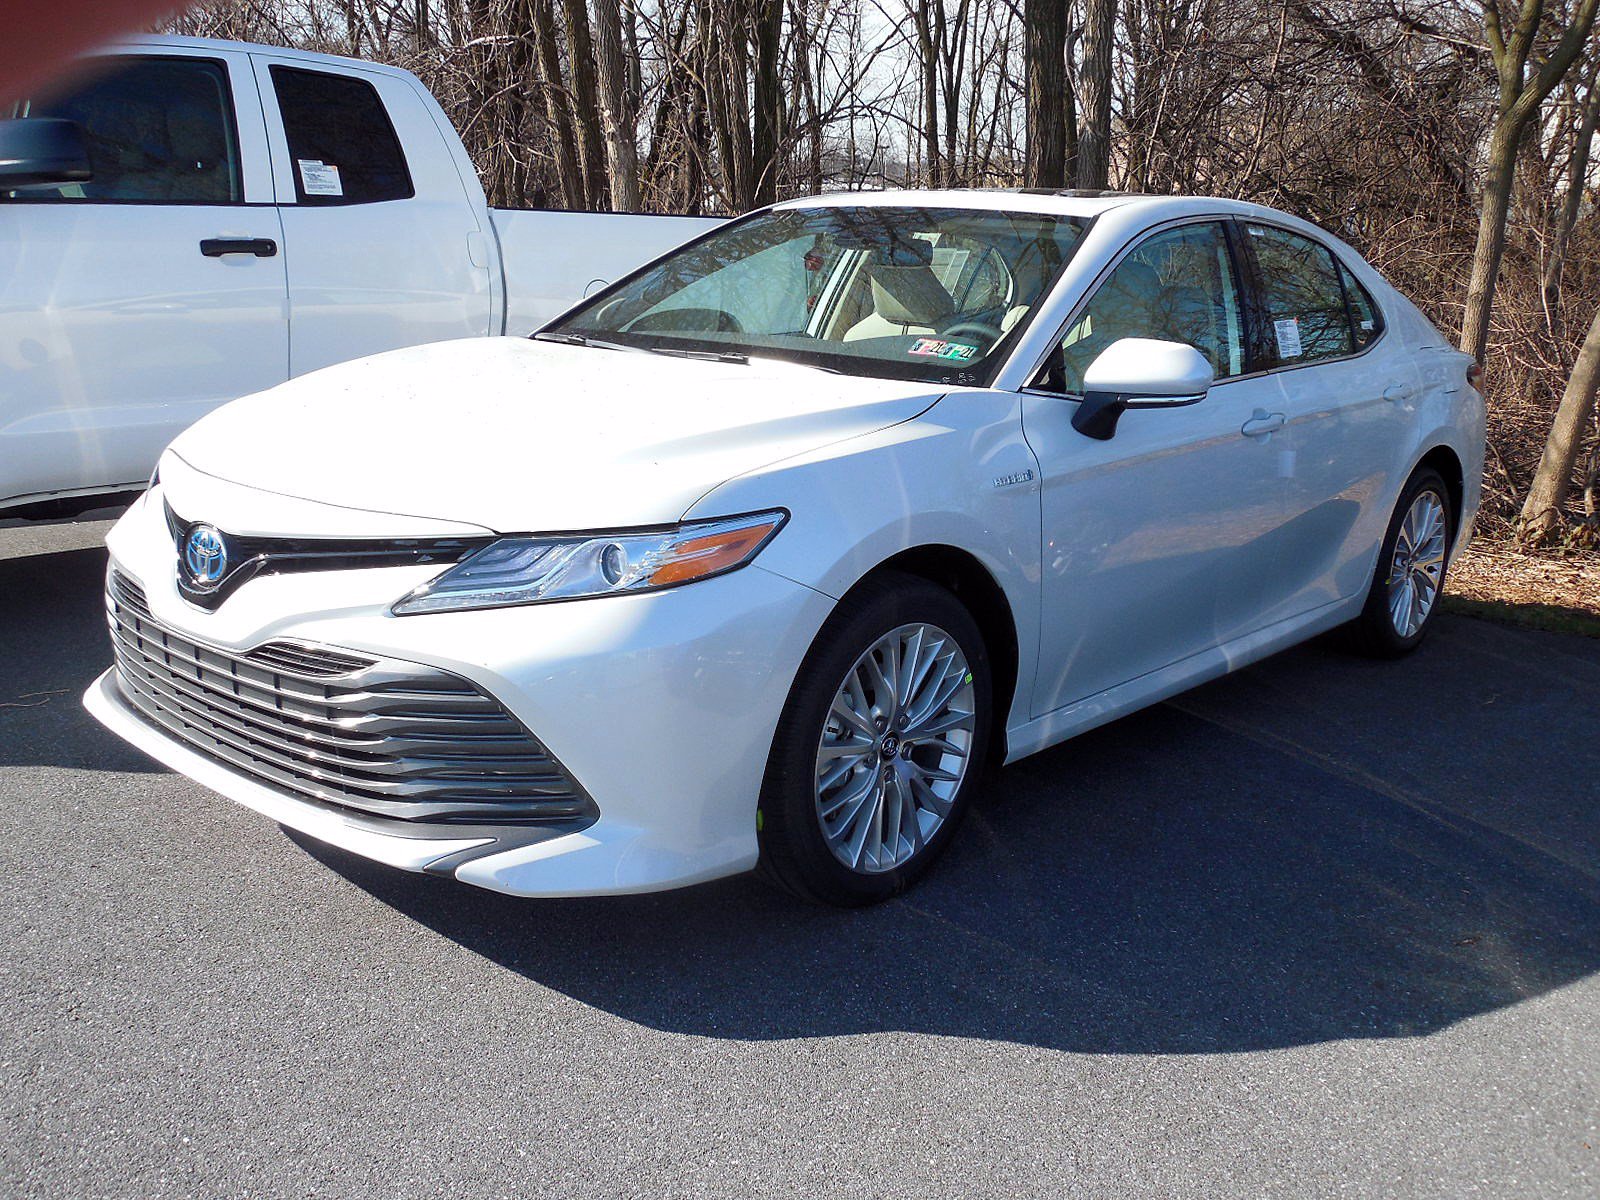 New 2020 Toyota Camry Hybrid XLE 4dr Car in East Petersburg #14757 ...
